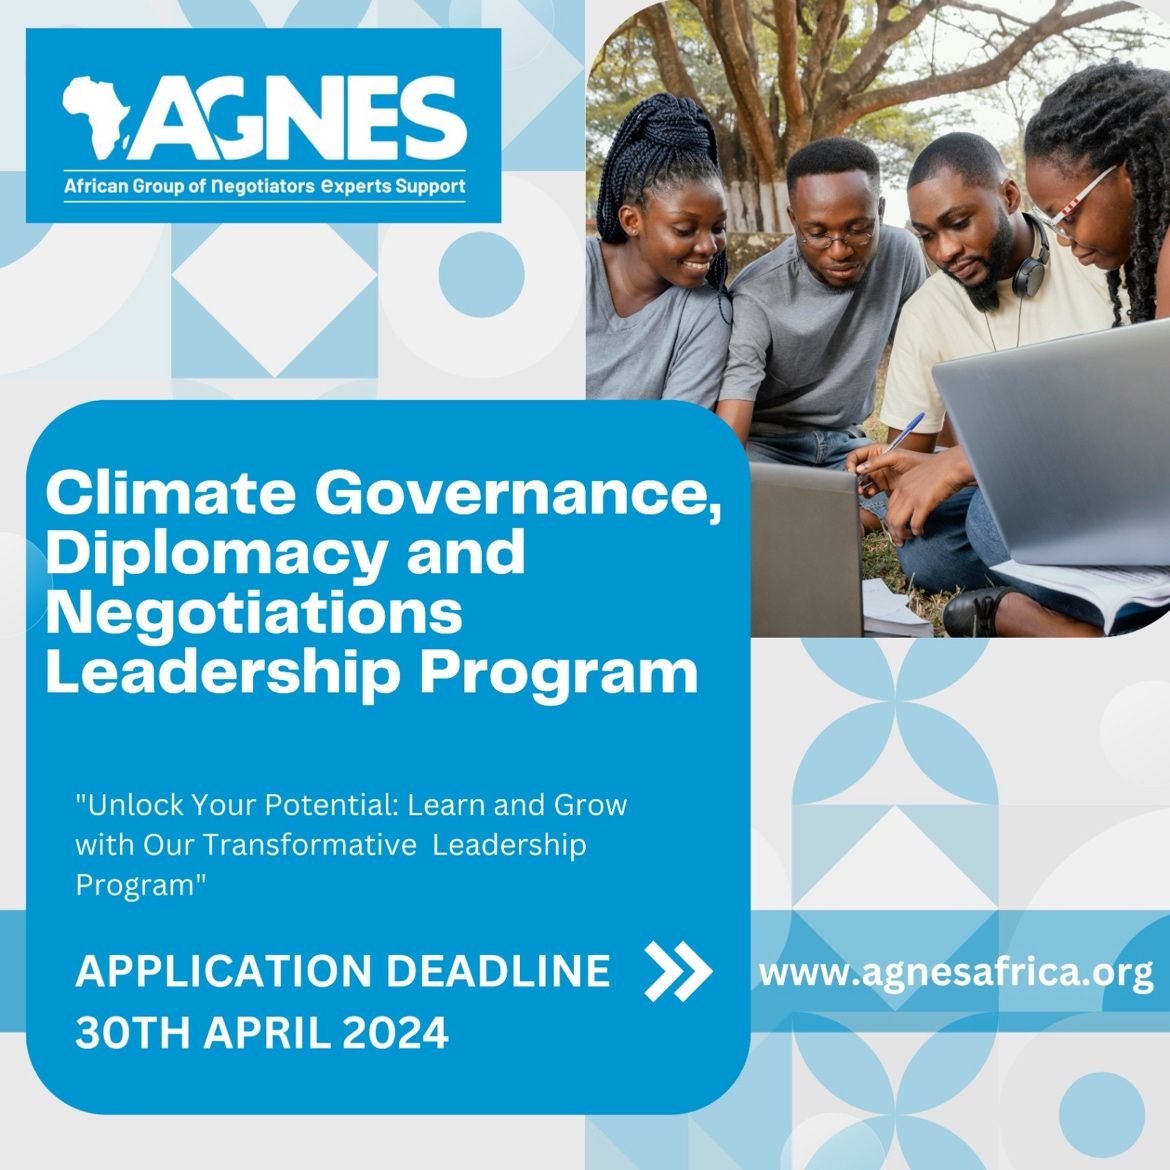 🌍 AGNES Africa Climate Governance, Diplomacy, and Negotiations Leadership Program

Deadline: Apply by April 30

Apply: shorturl.at/hjovV

#ClimateLeadership #ClimateDiplomacy #ClimateAction #ApplyNow #ClimateGovernance #Negotiations #ClimateJustice #SustainableDevelopment